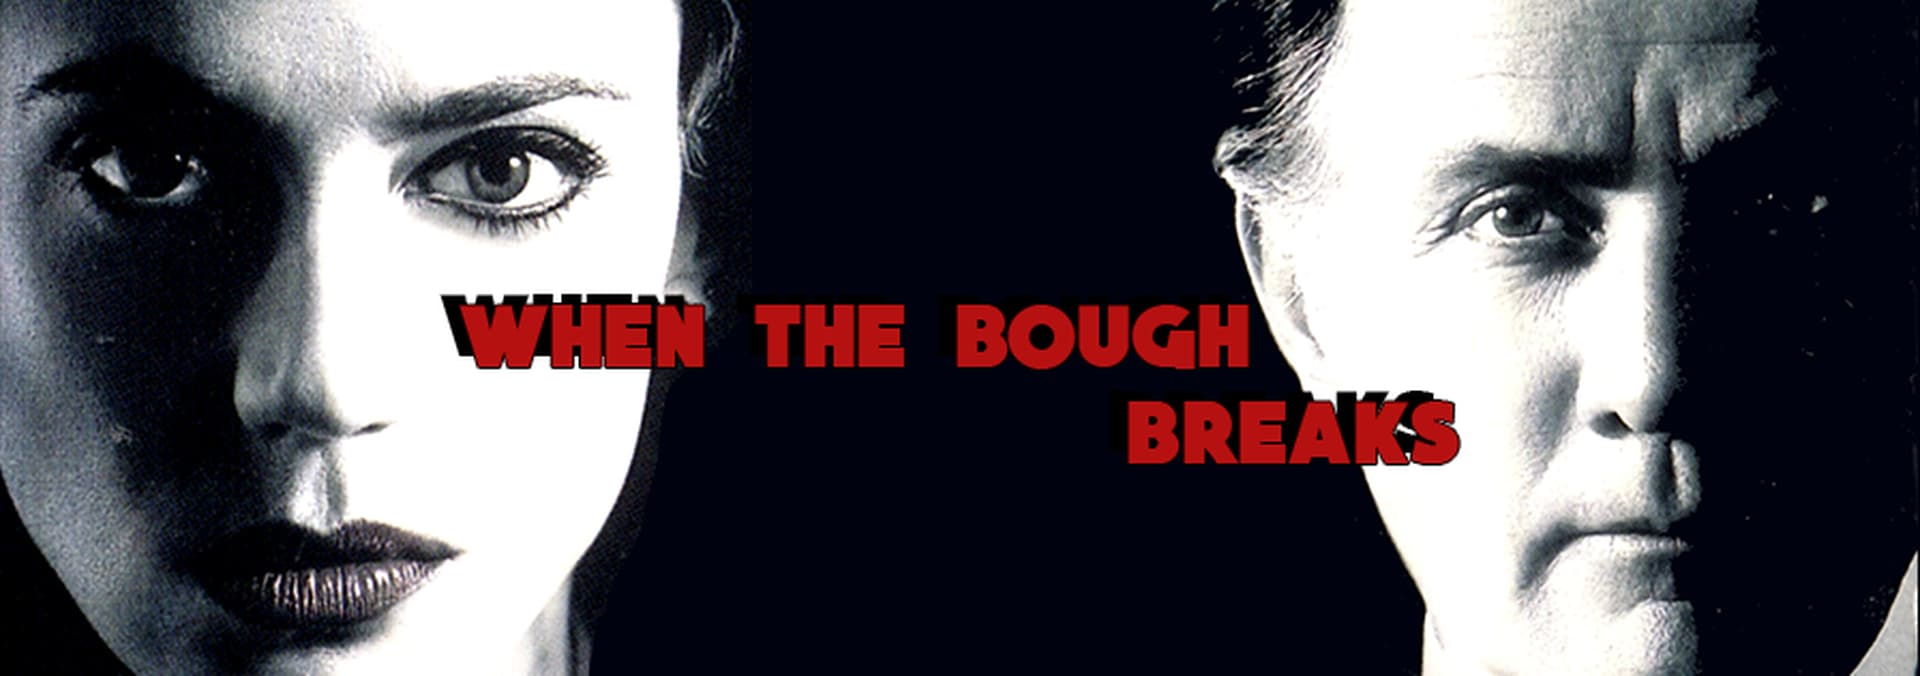 where is the movie when the bough breaks playing on 9/25/16